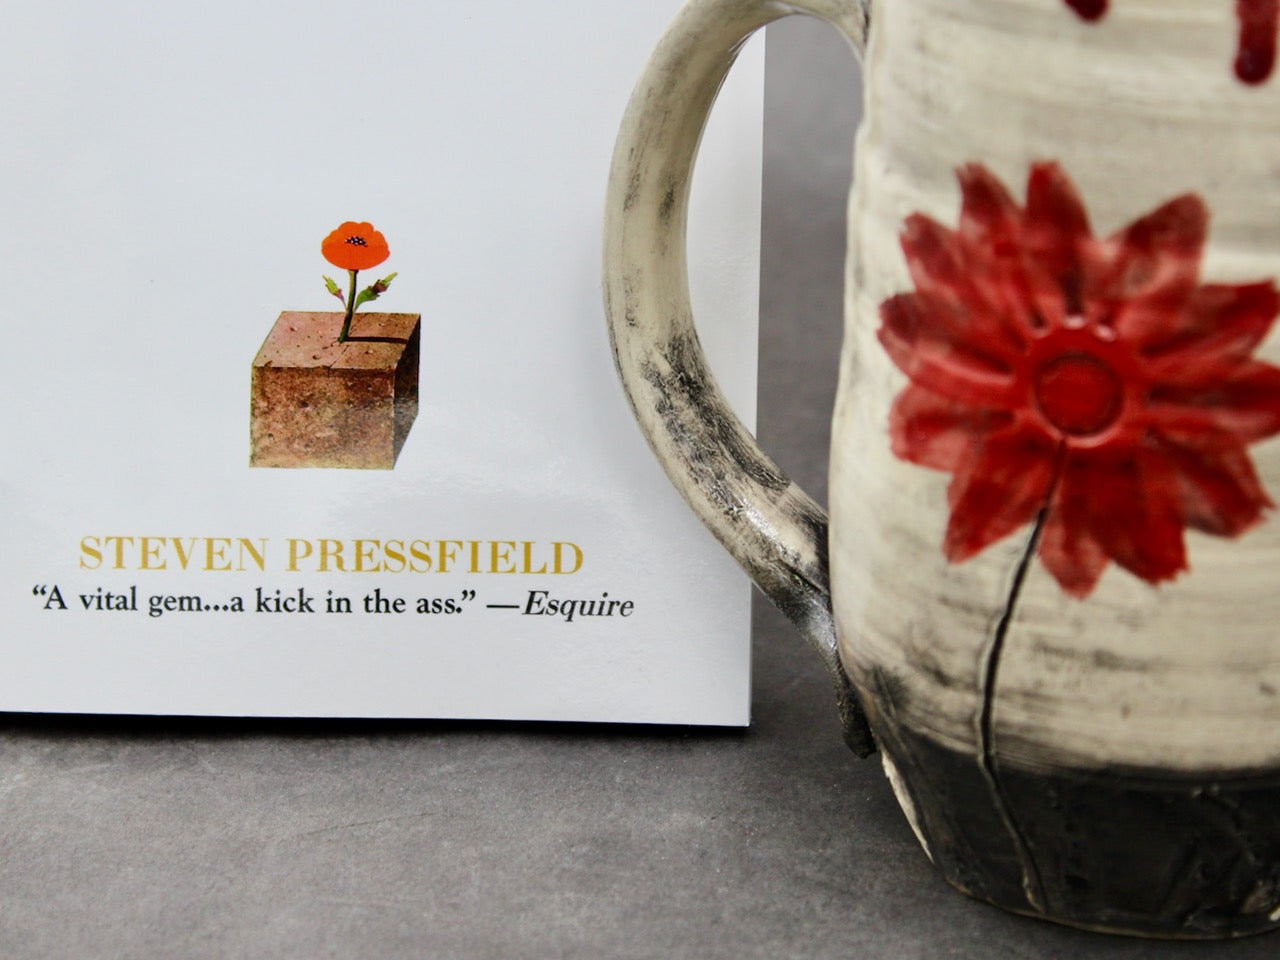 One Bullet Flower Mug and Autographed Book, "The War of Art" by Steven Pressfield (SK7791)